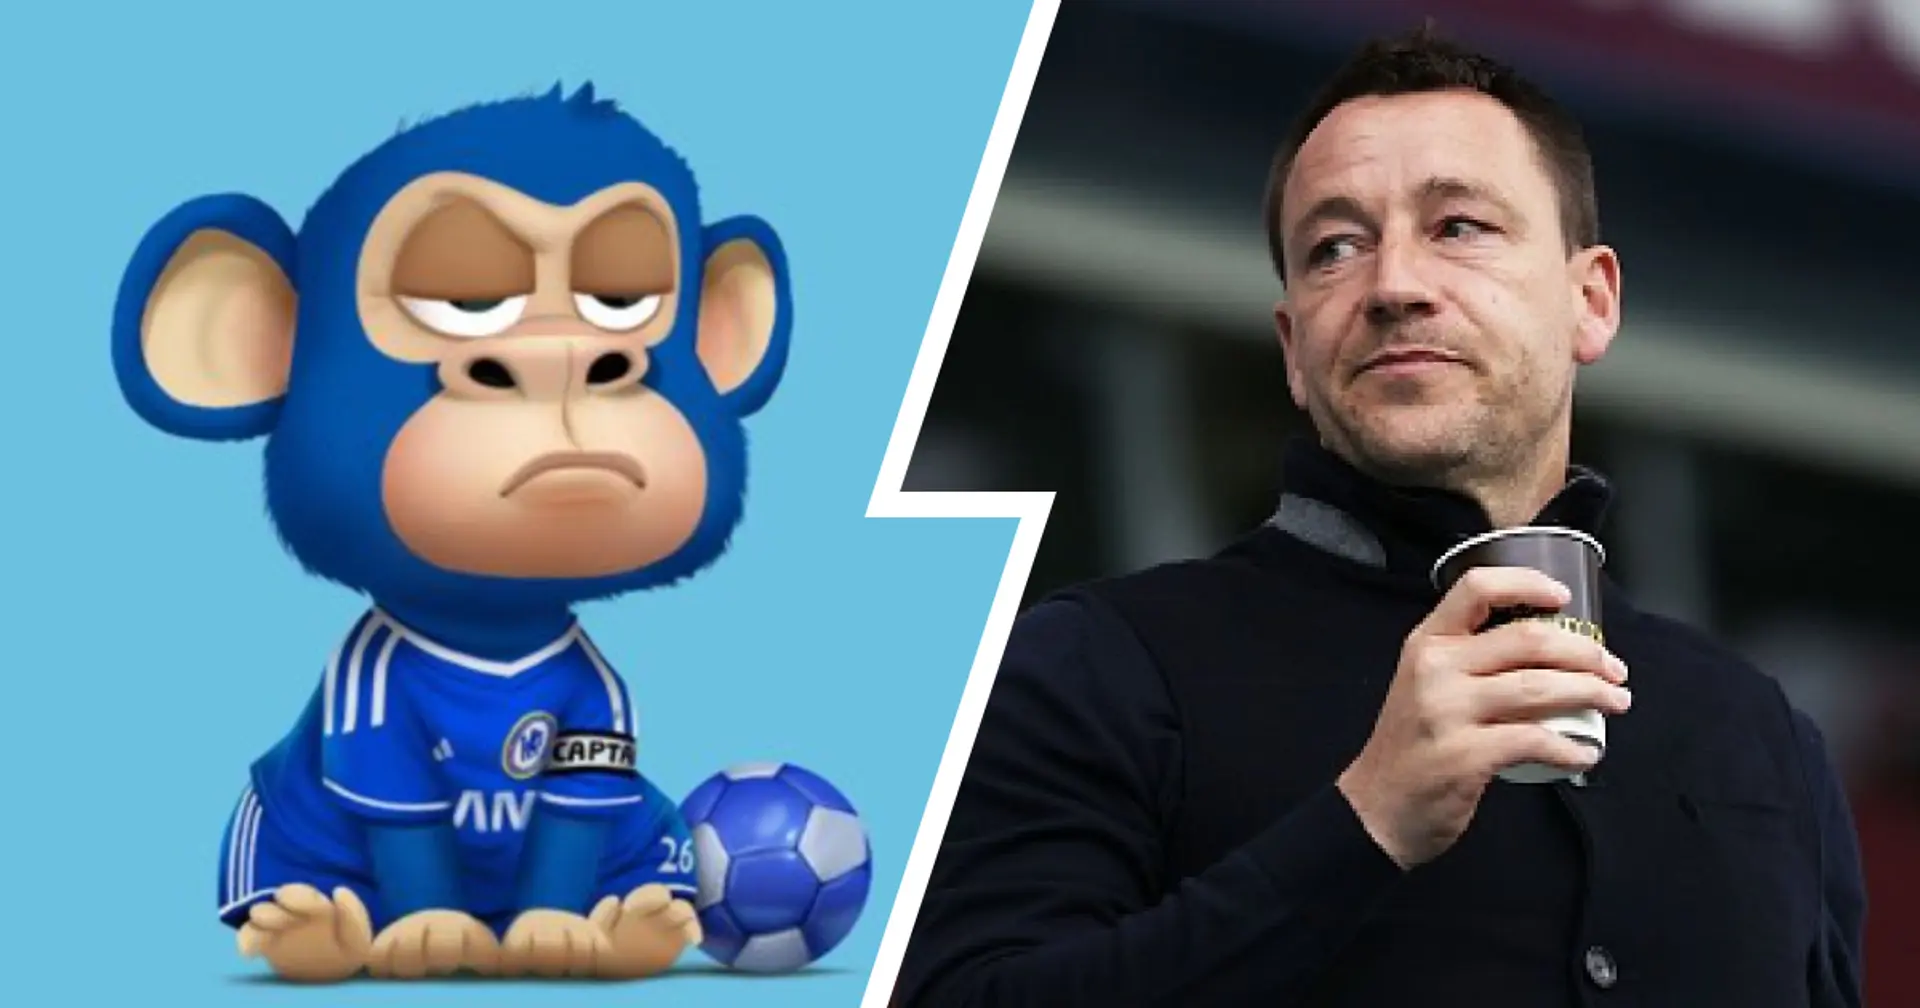 'Captain. Leader. Intellectual Property thief': Chelsea fans slam Terry for promoting NFTs